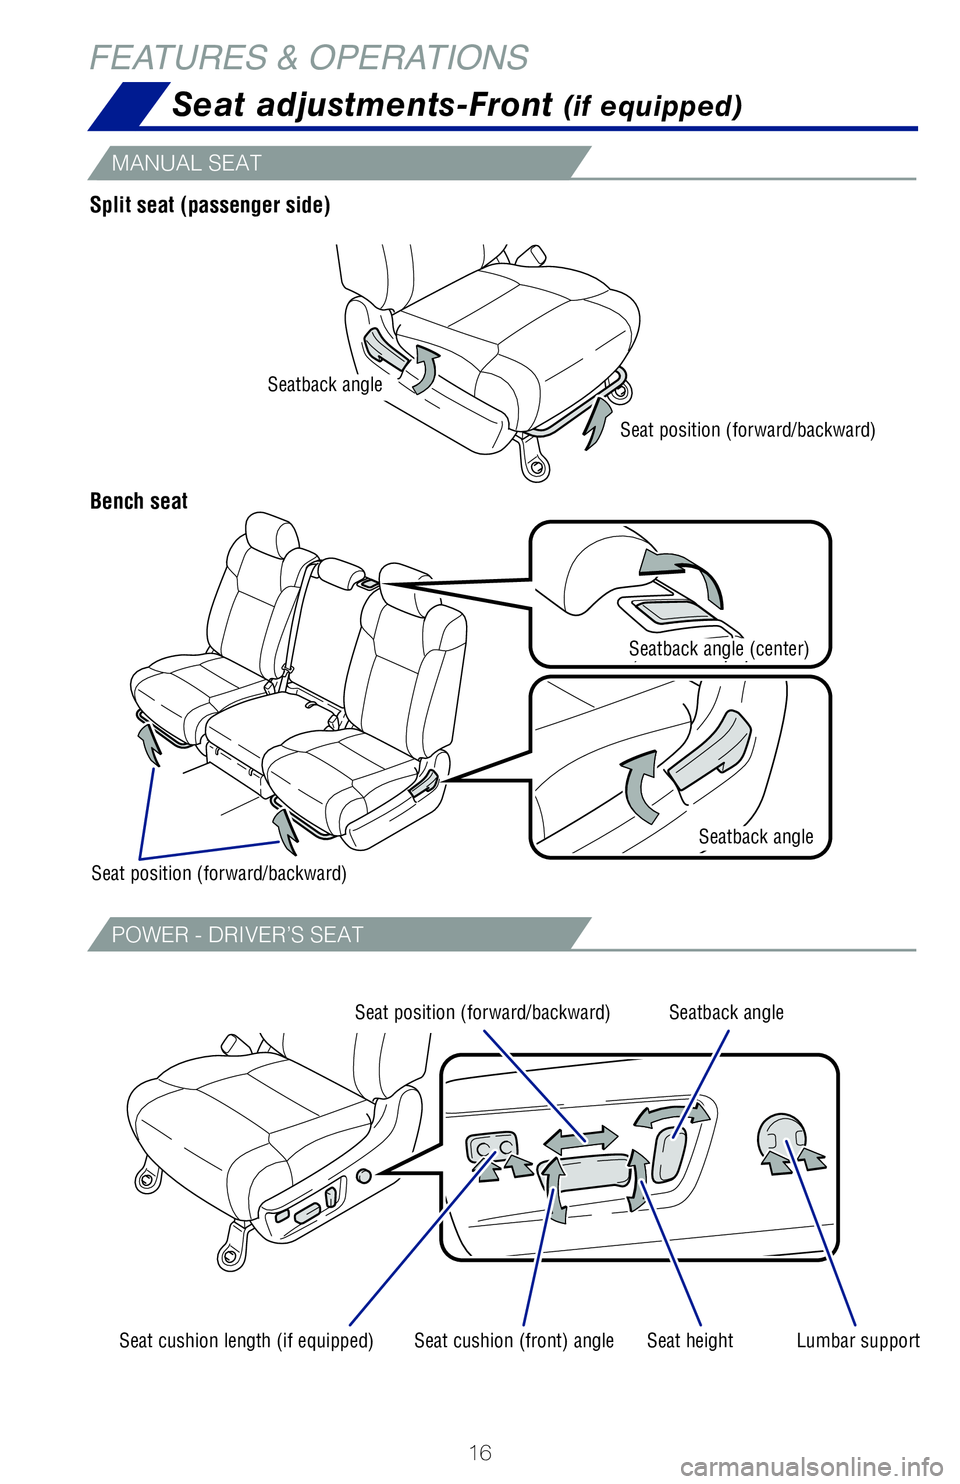 TOYOTA TUNDRA 2020   (in English) User Guide 16
FEATURES & OPERATIONS
Seat adjustments-Front (if equipped)
Split seat (passenger side) 
Bench seat
MANUAL SEAT
POWER - DRIVER’S SEAT
Seat position (forward/backward)
Seat cushion length (if equip